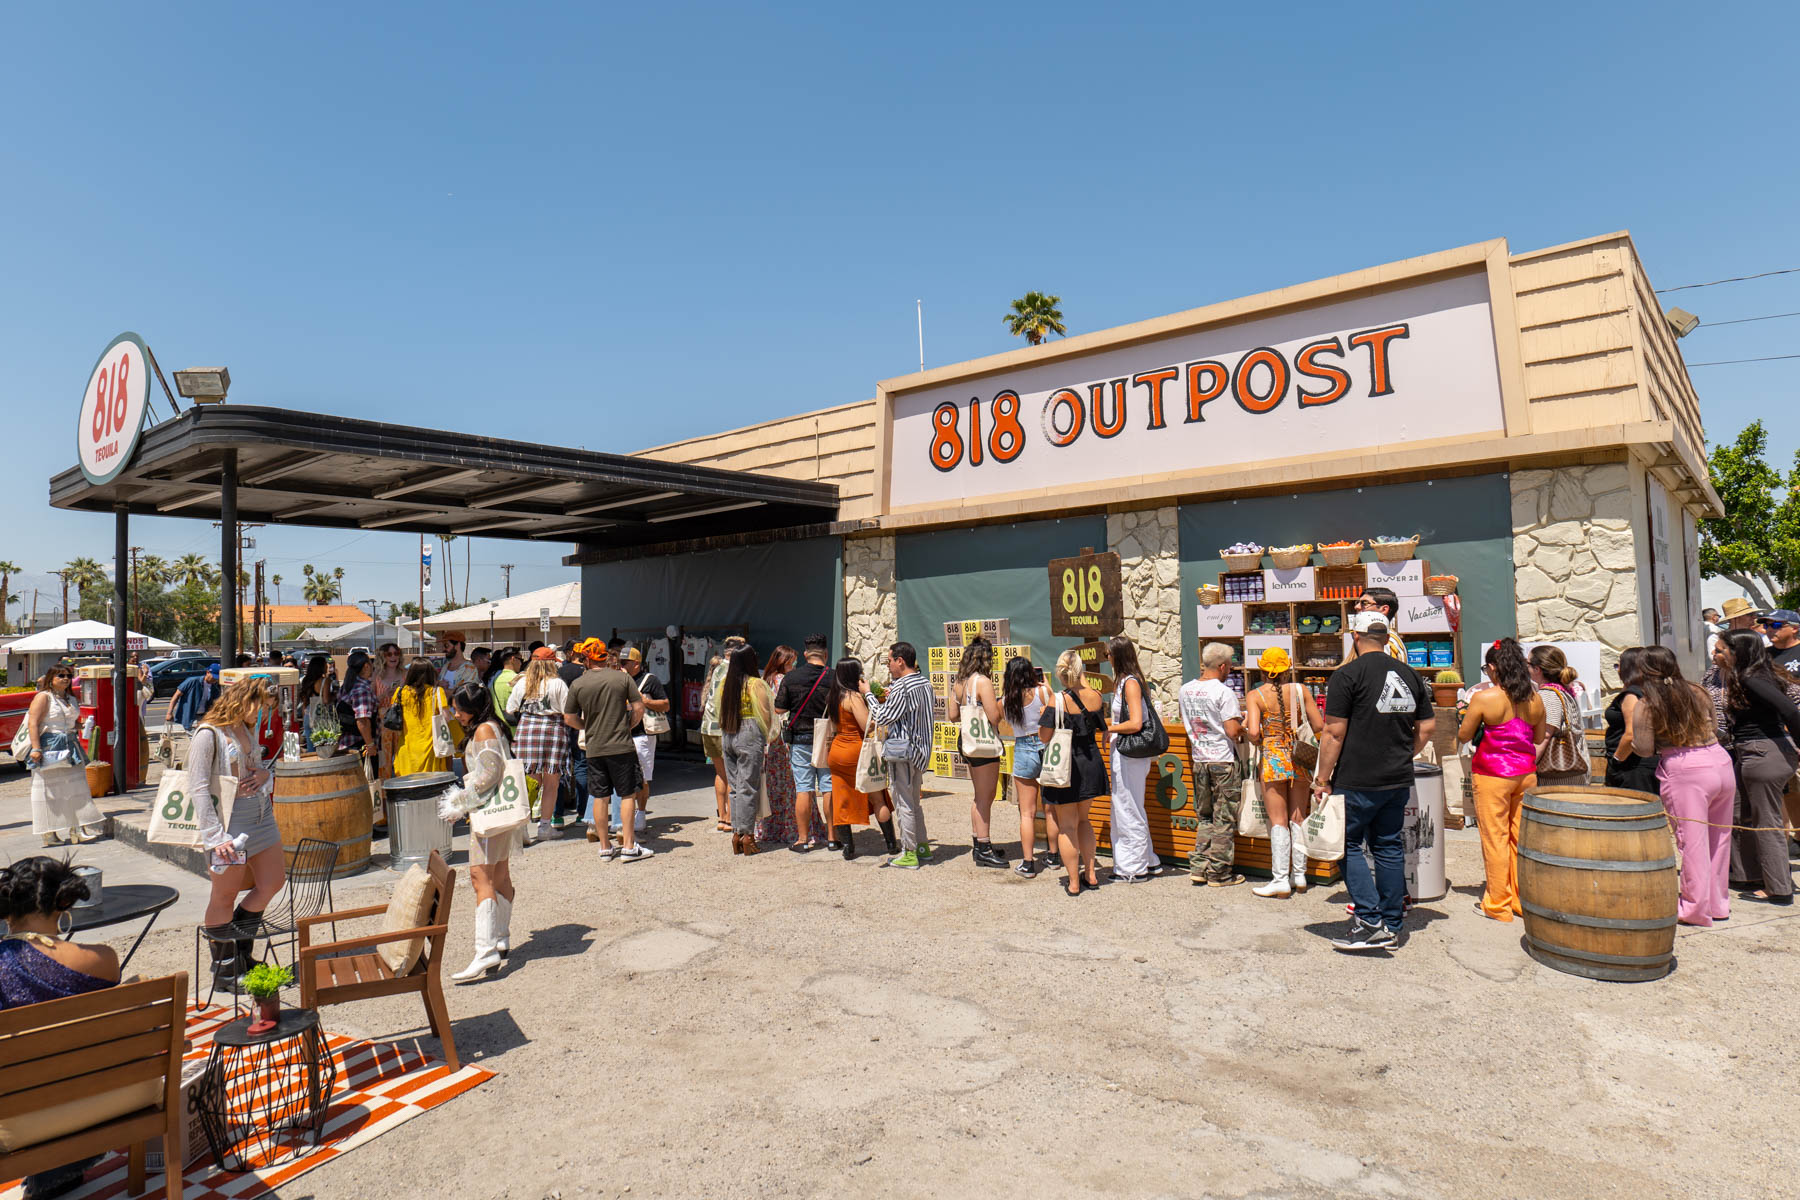 Guests lining up to receive merchandise and goodie bags from the 818 Outpost.